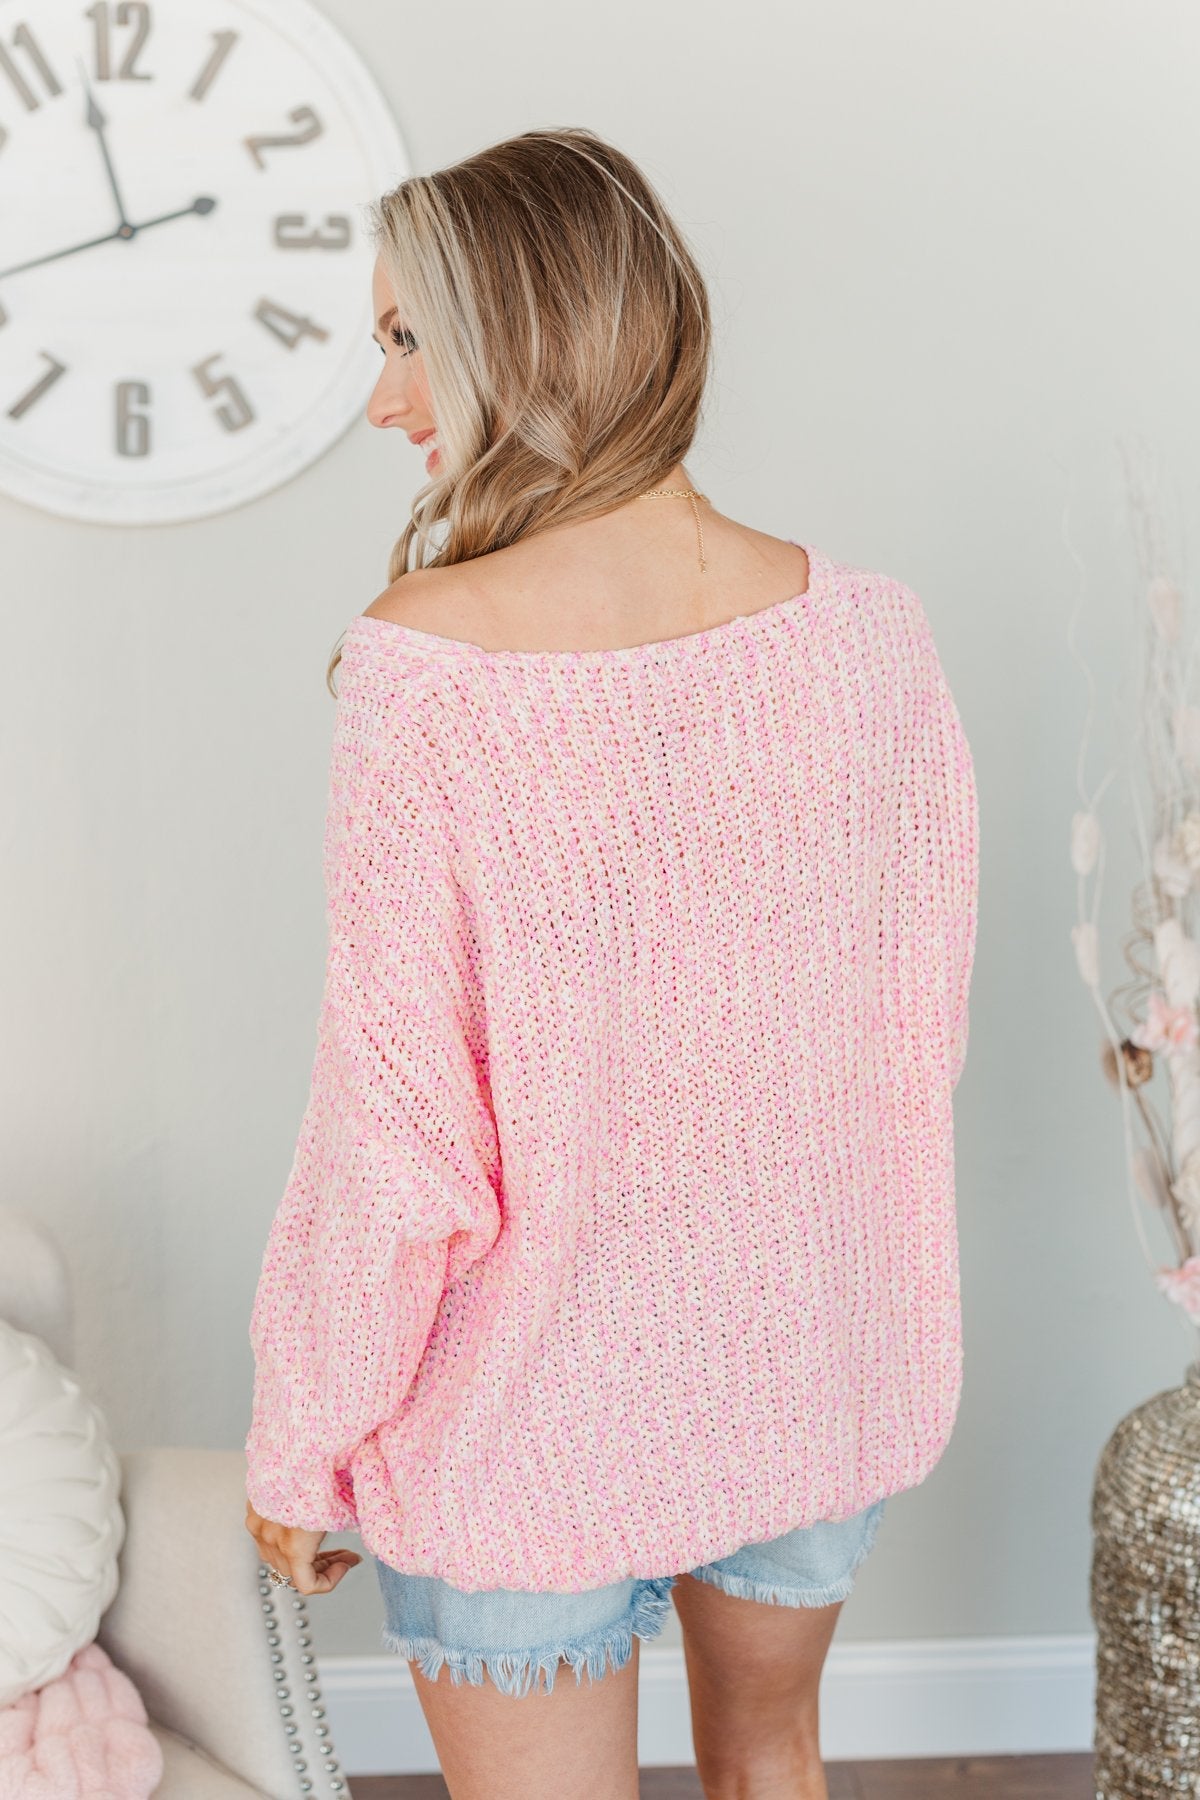 Let Your Confidence Shine Knit Sweater- Pink, Yellow, & Ivory